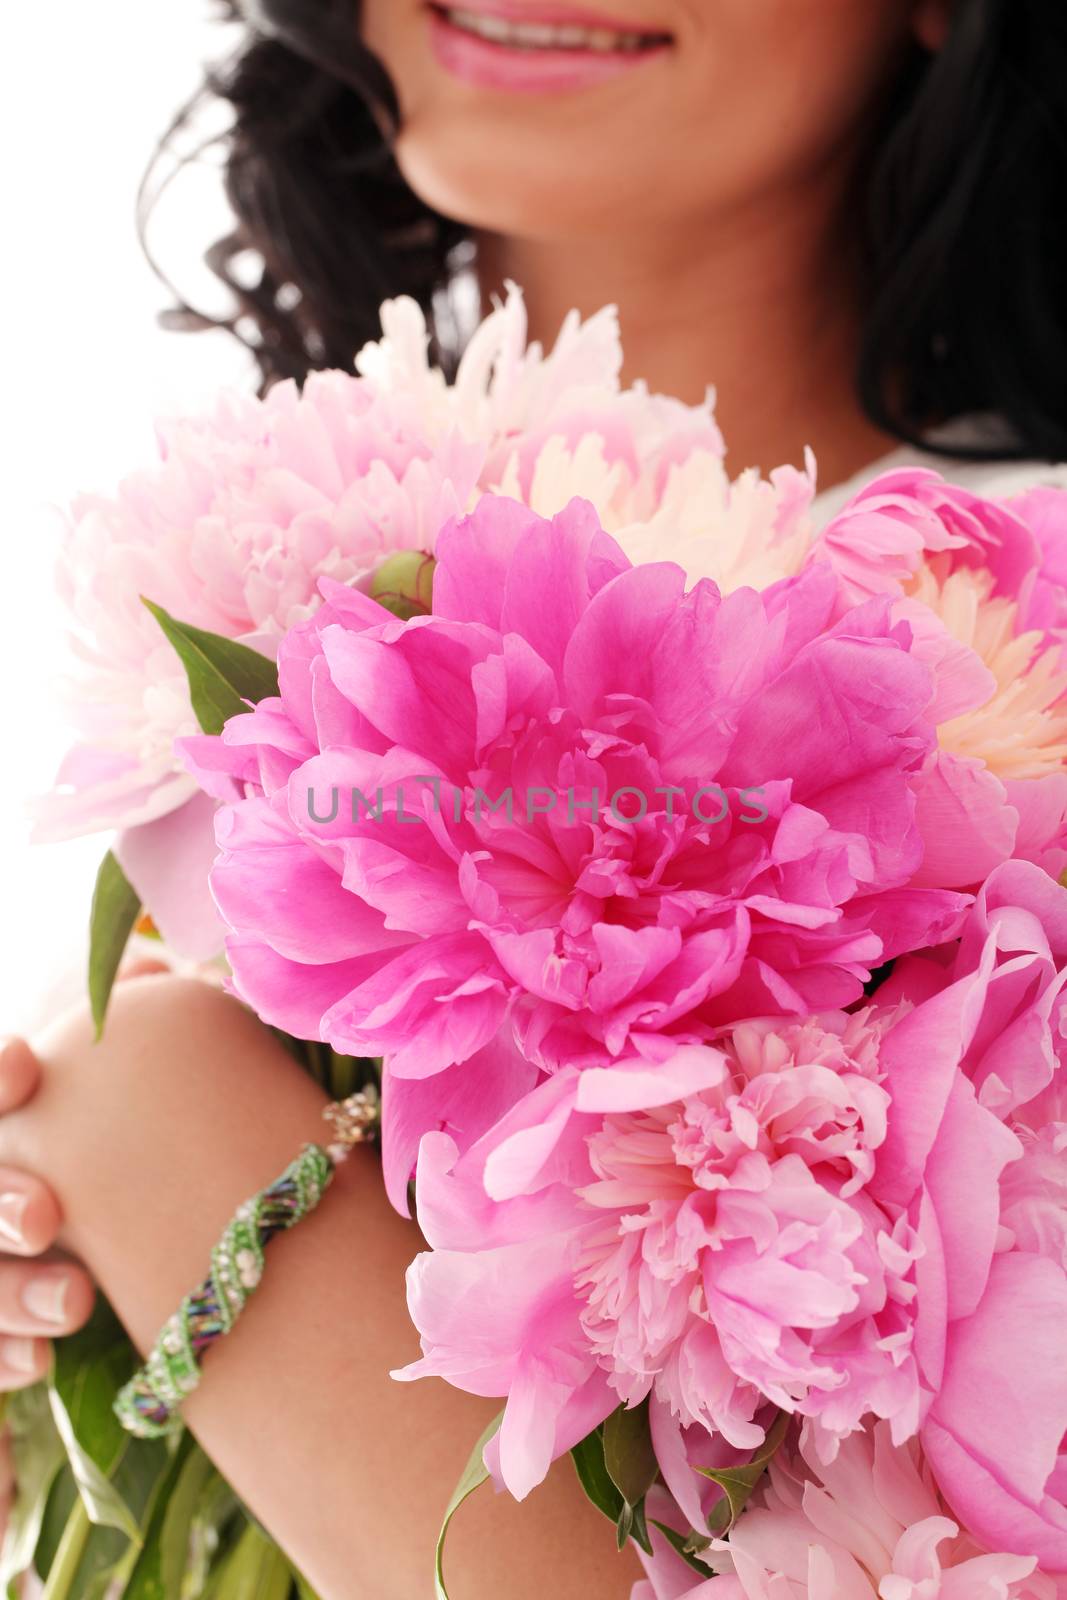 Beautiful bouquet of rose peonies in woman's hands